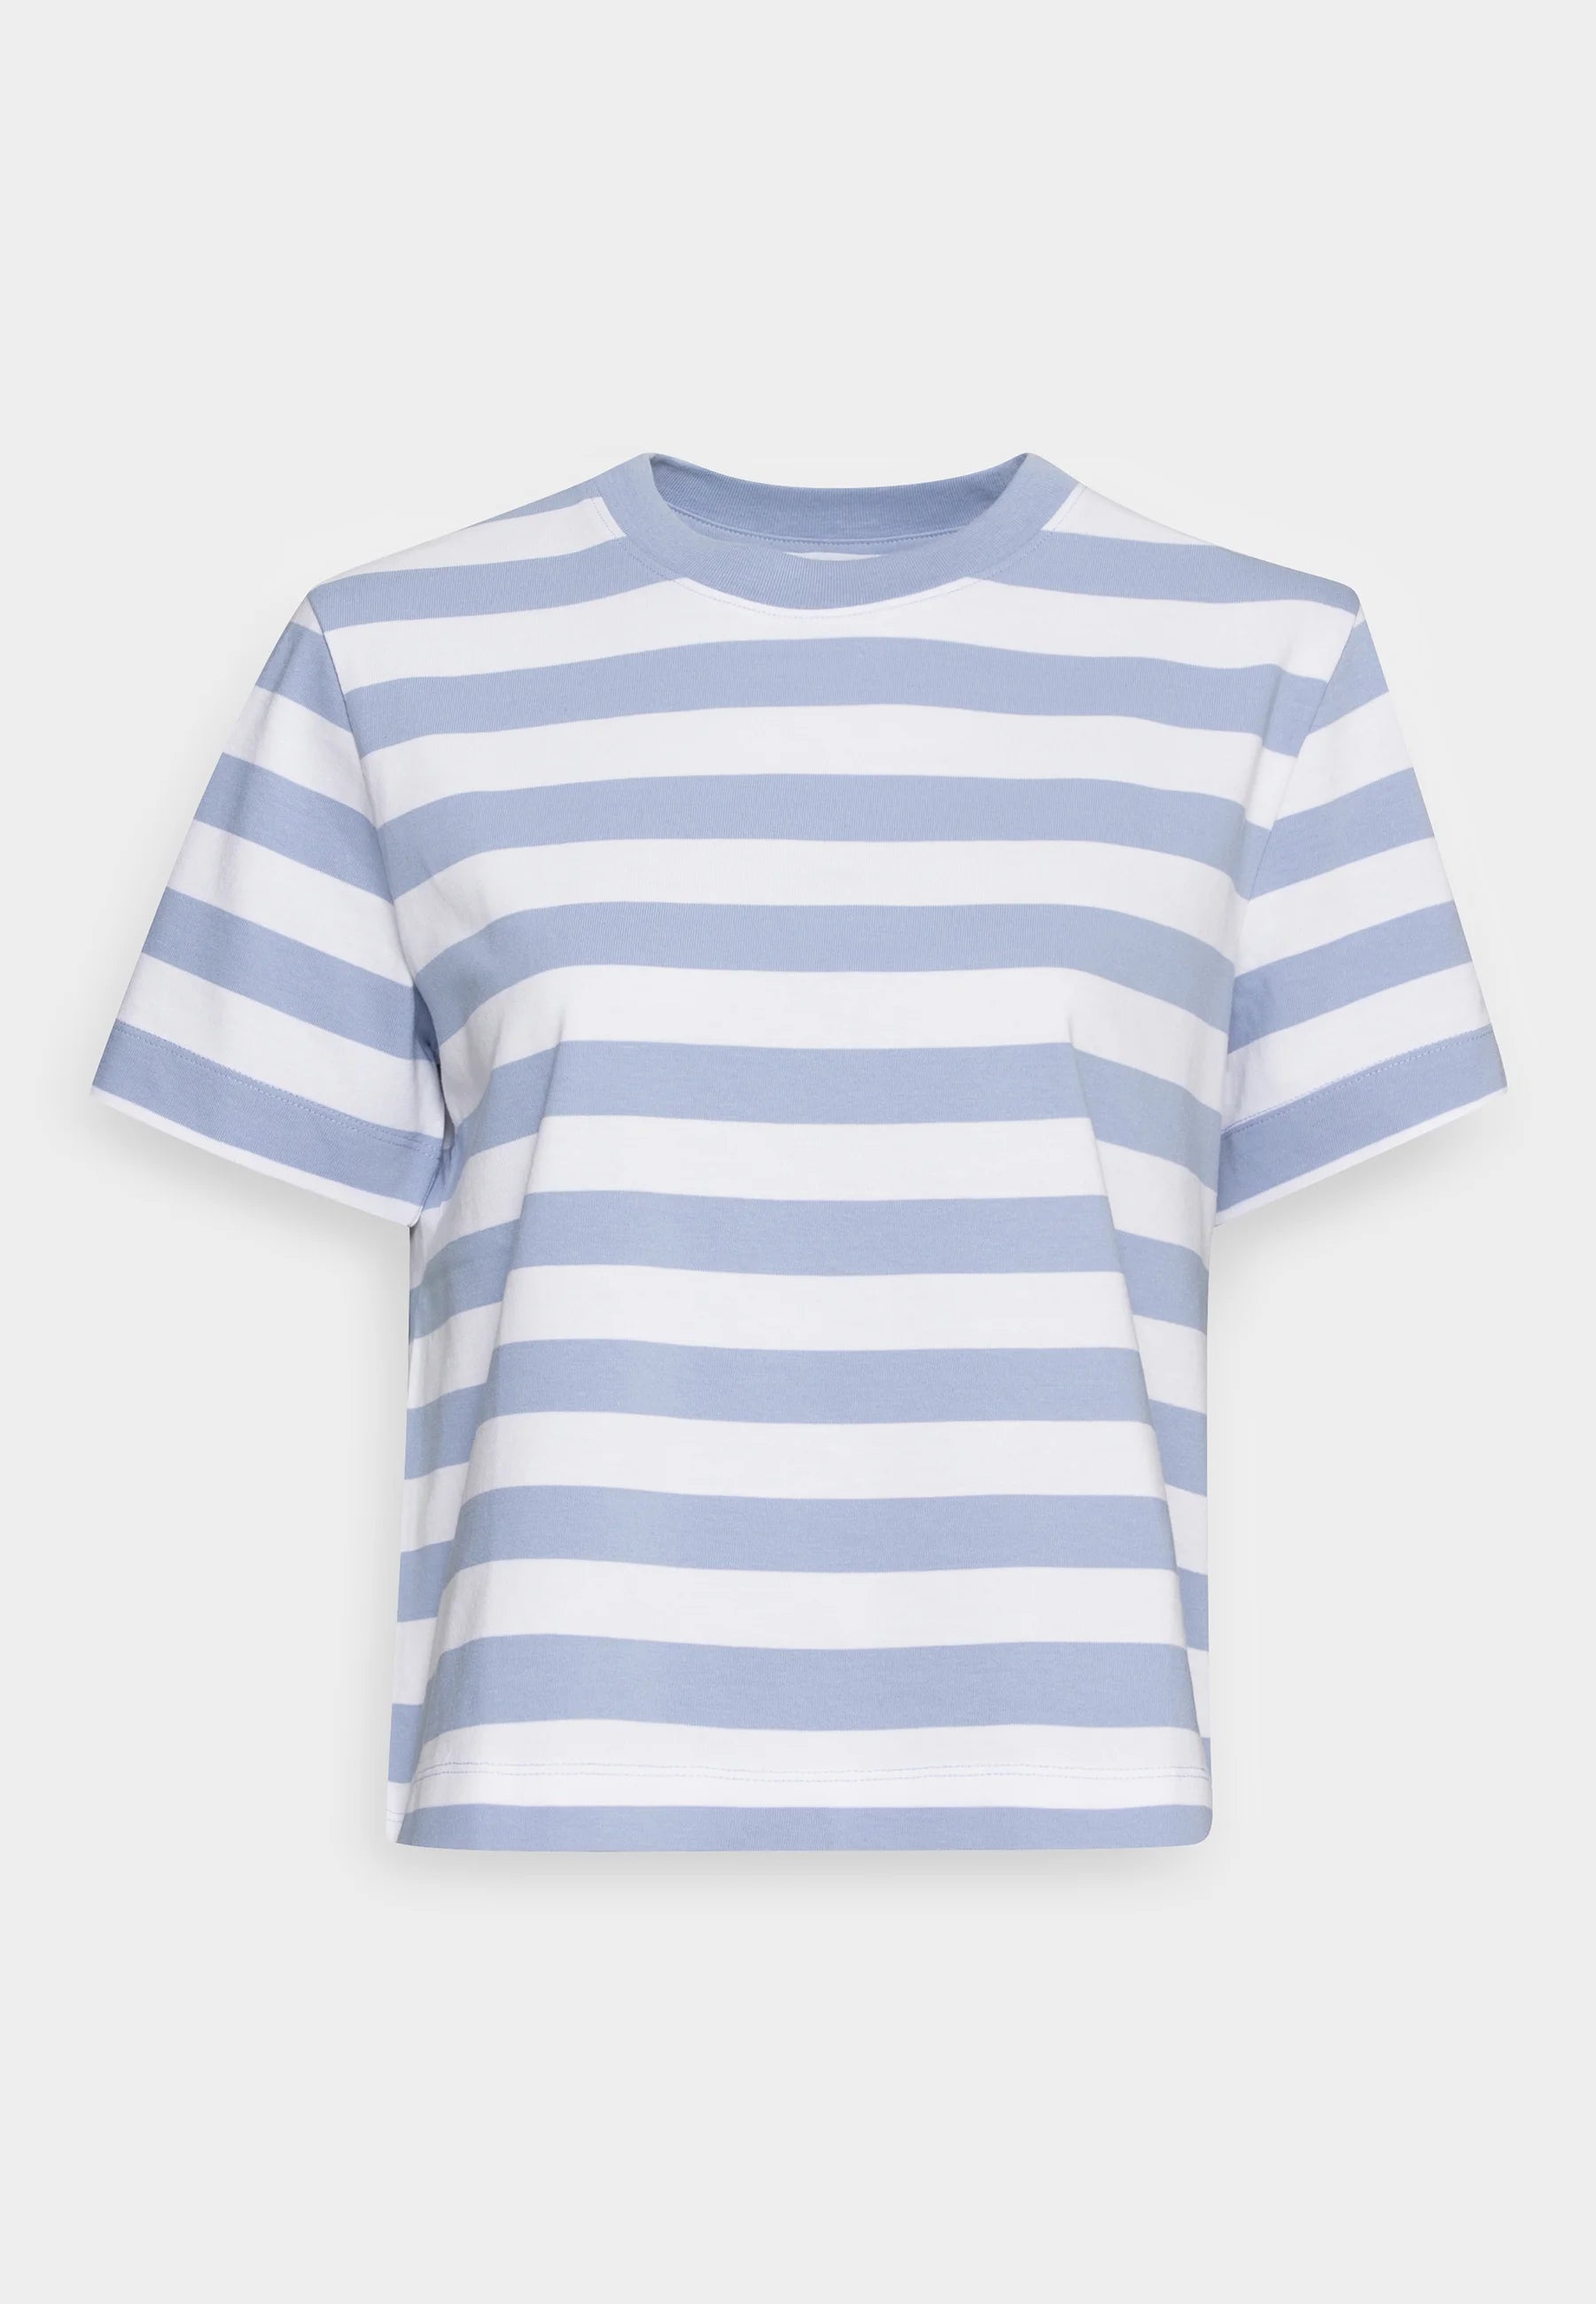 SLF Essential Striped SS Boxy Tee in Blue Heron